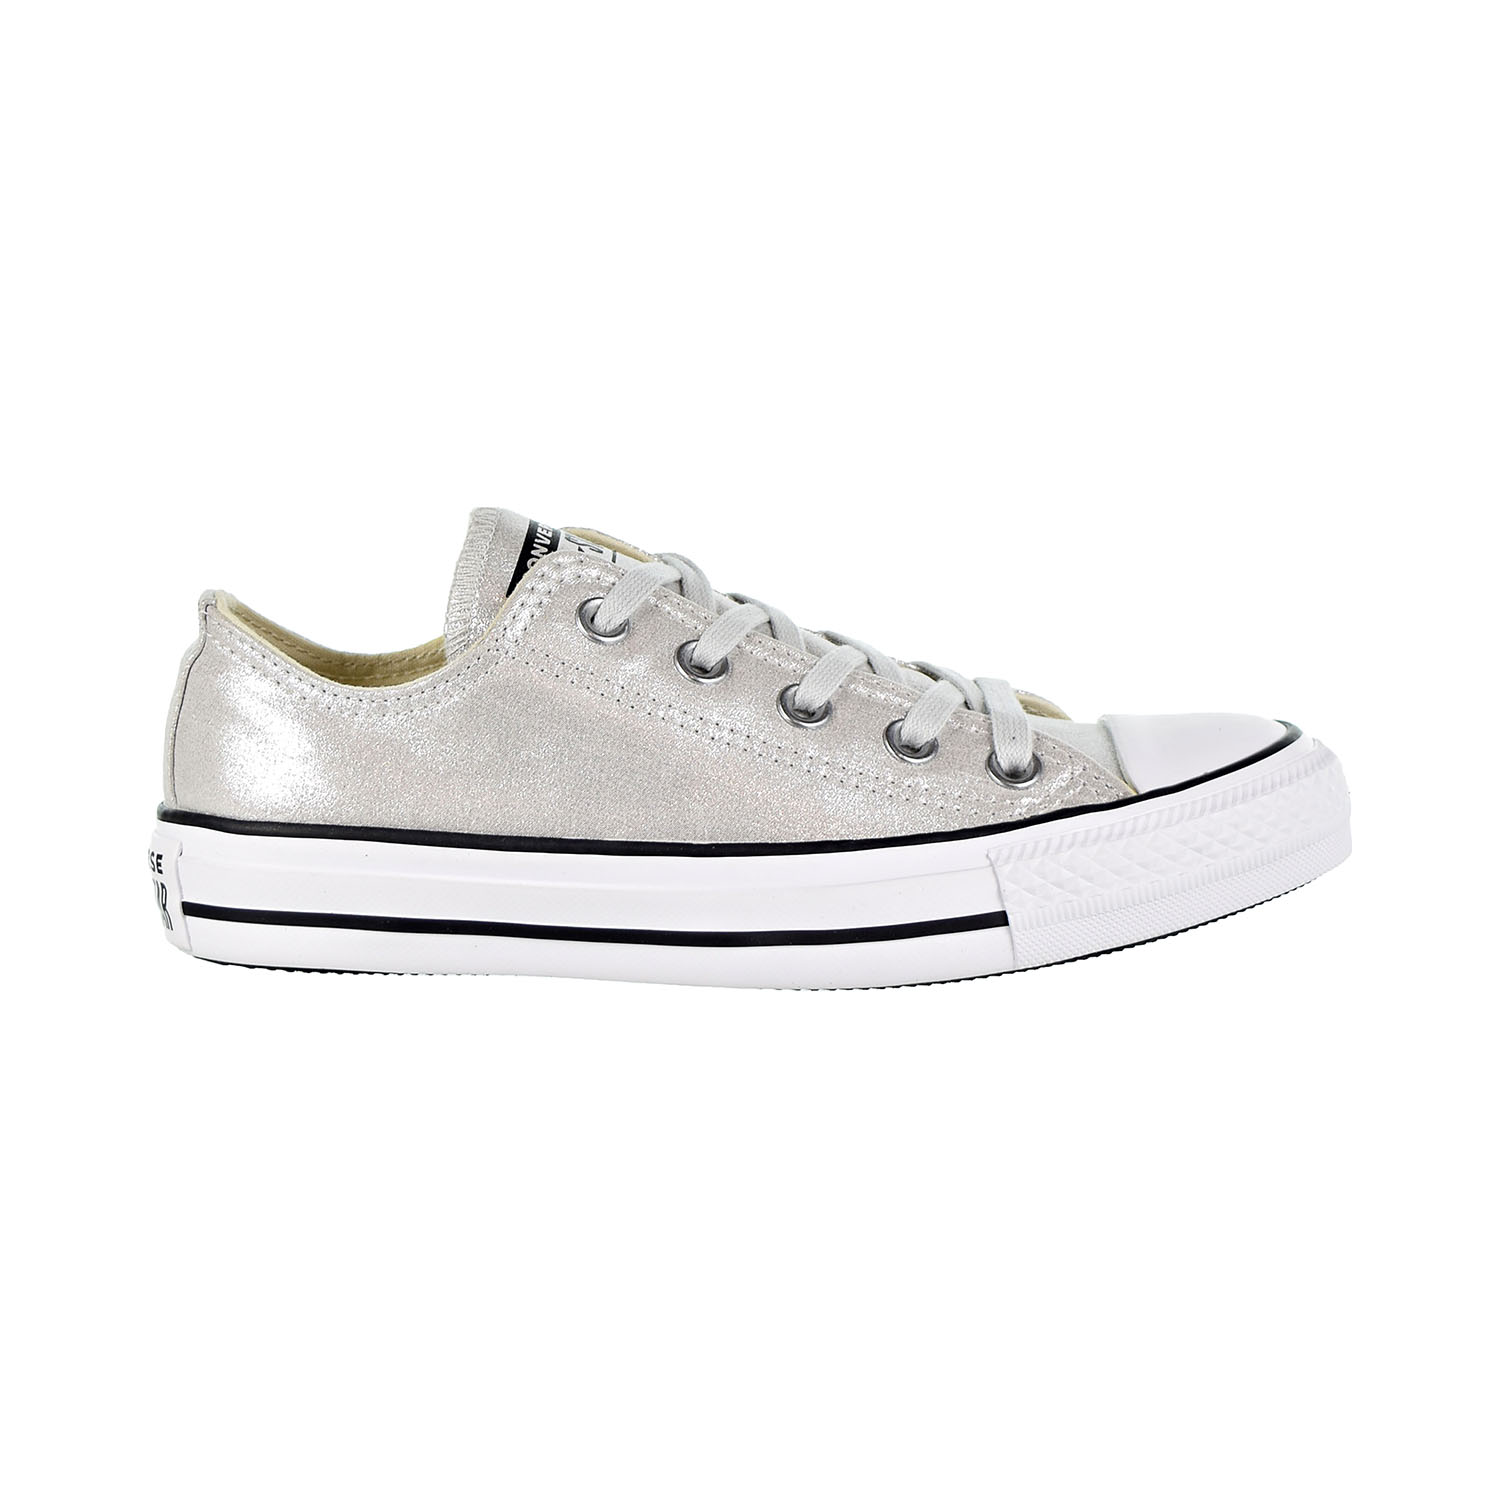 converse ox womens shoes